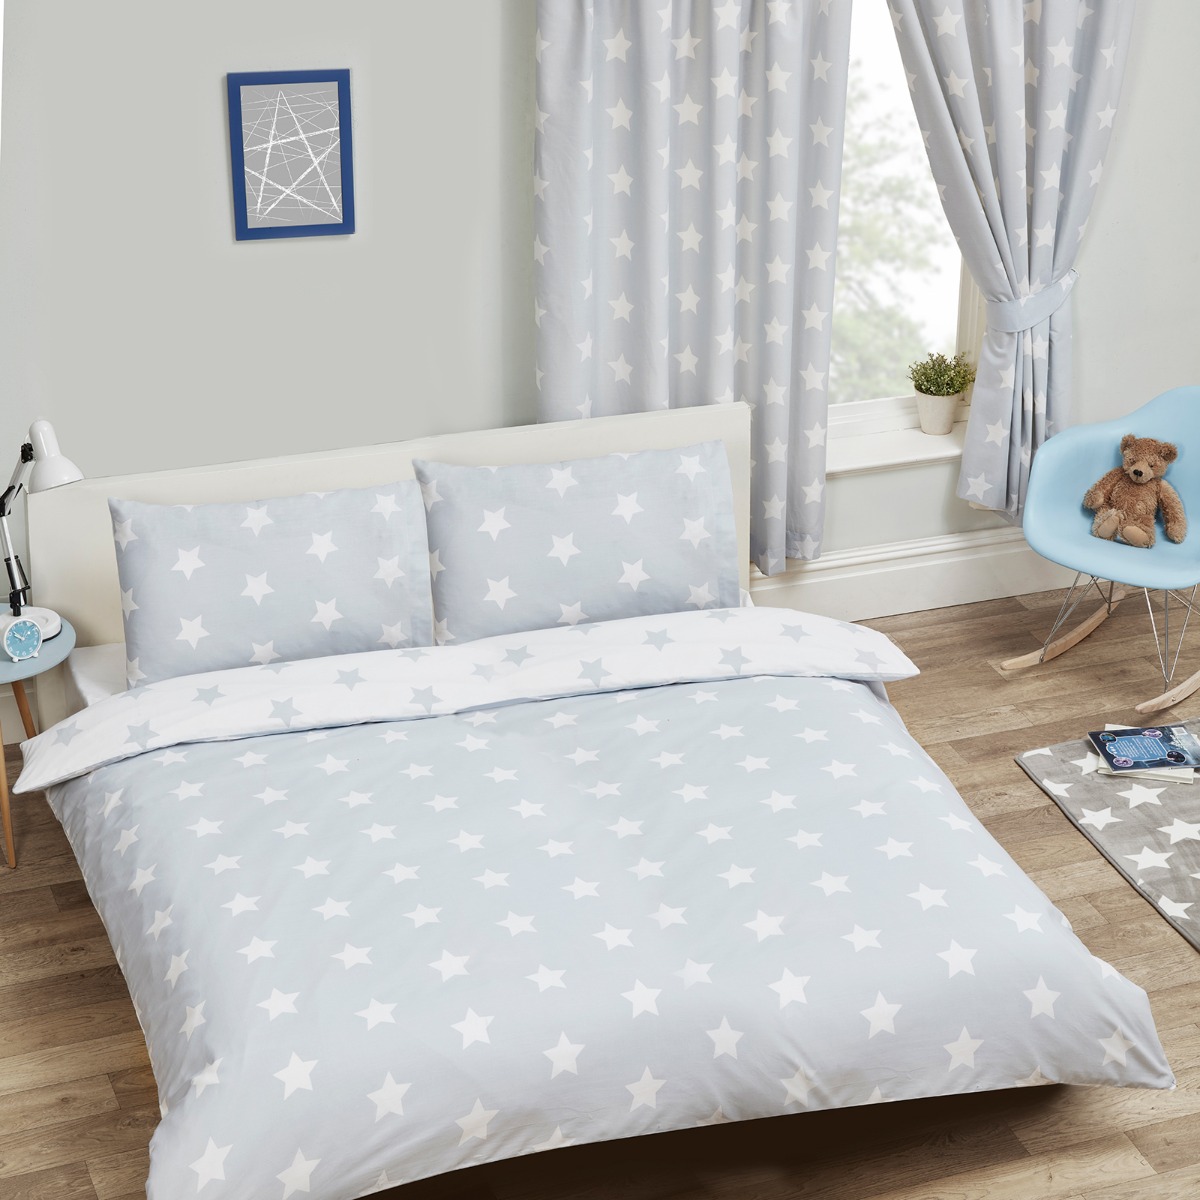 Grey and White Stars Duvet Cover and Pillowcase Set